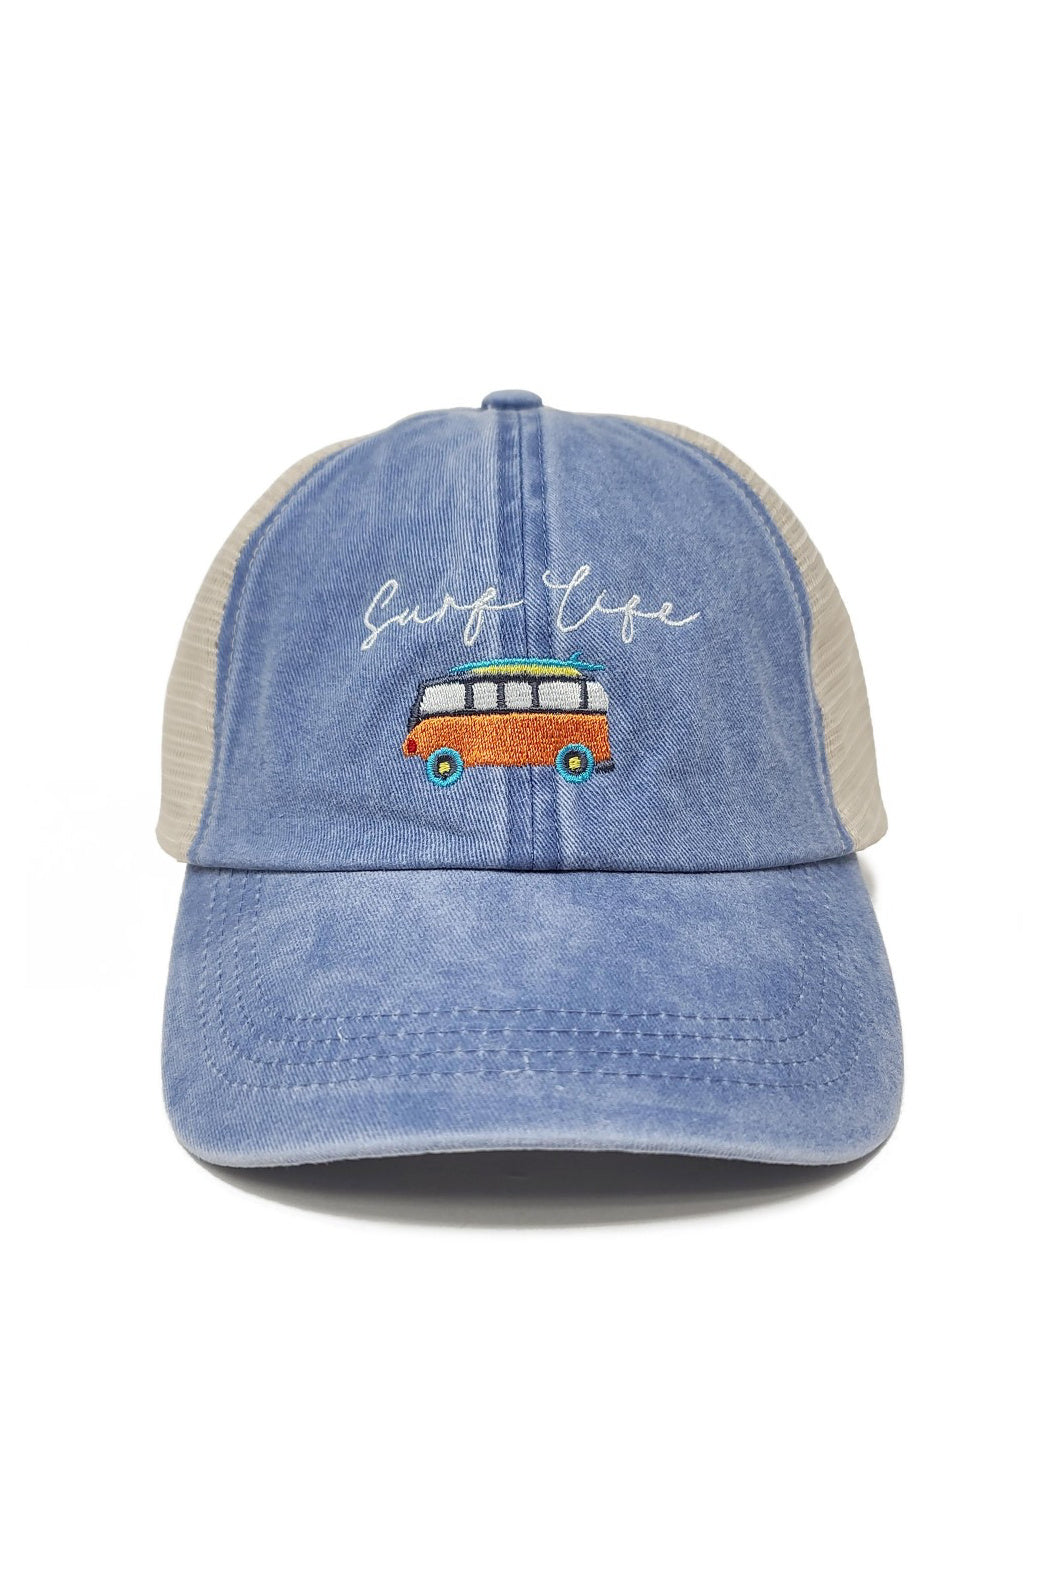 Surf Life Embroidered Trucker Cap